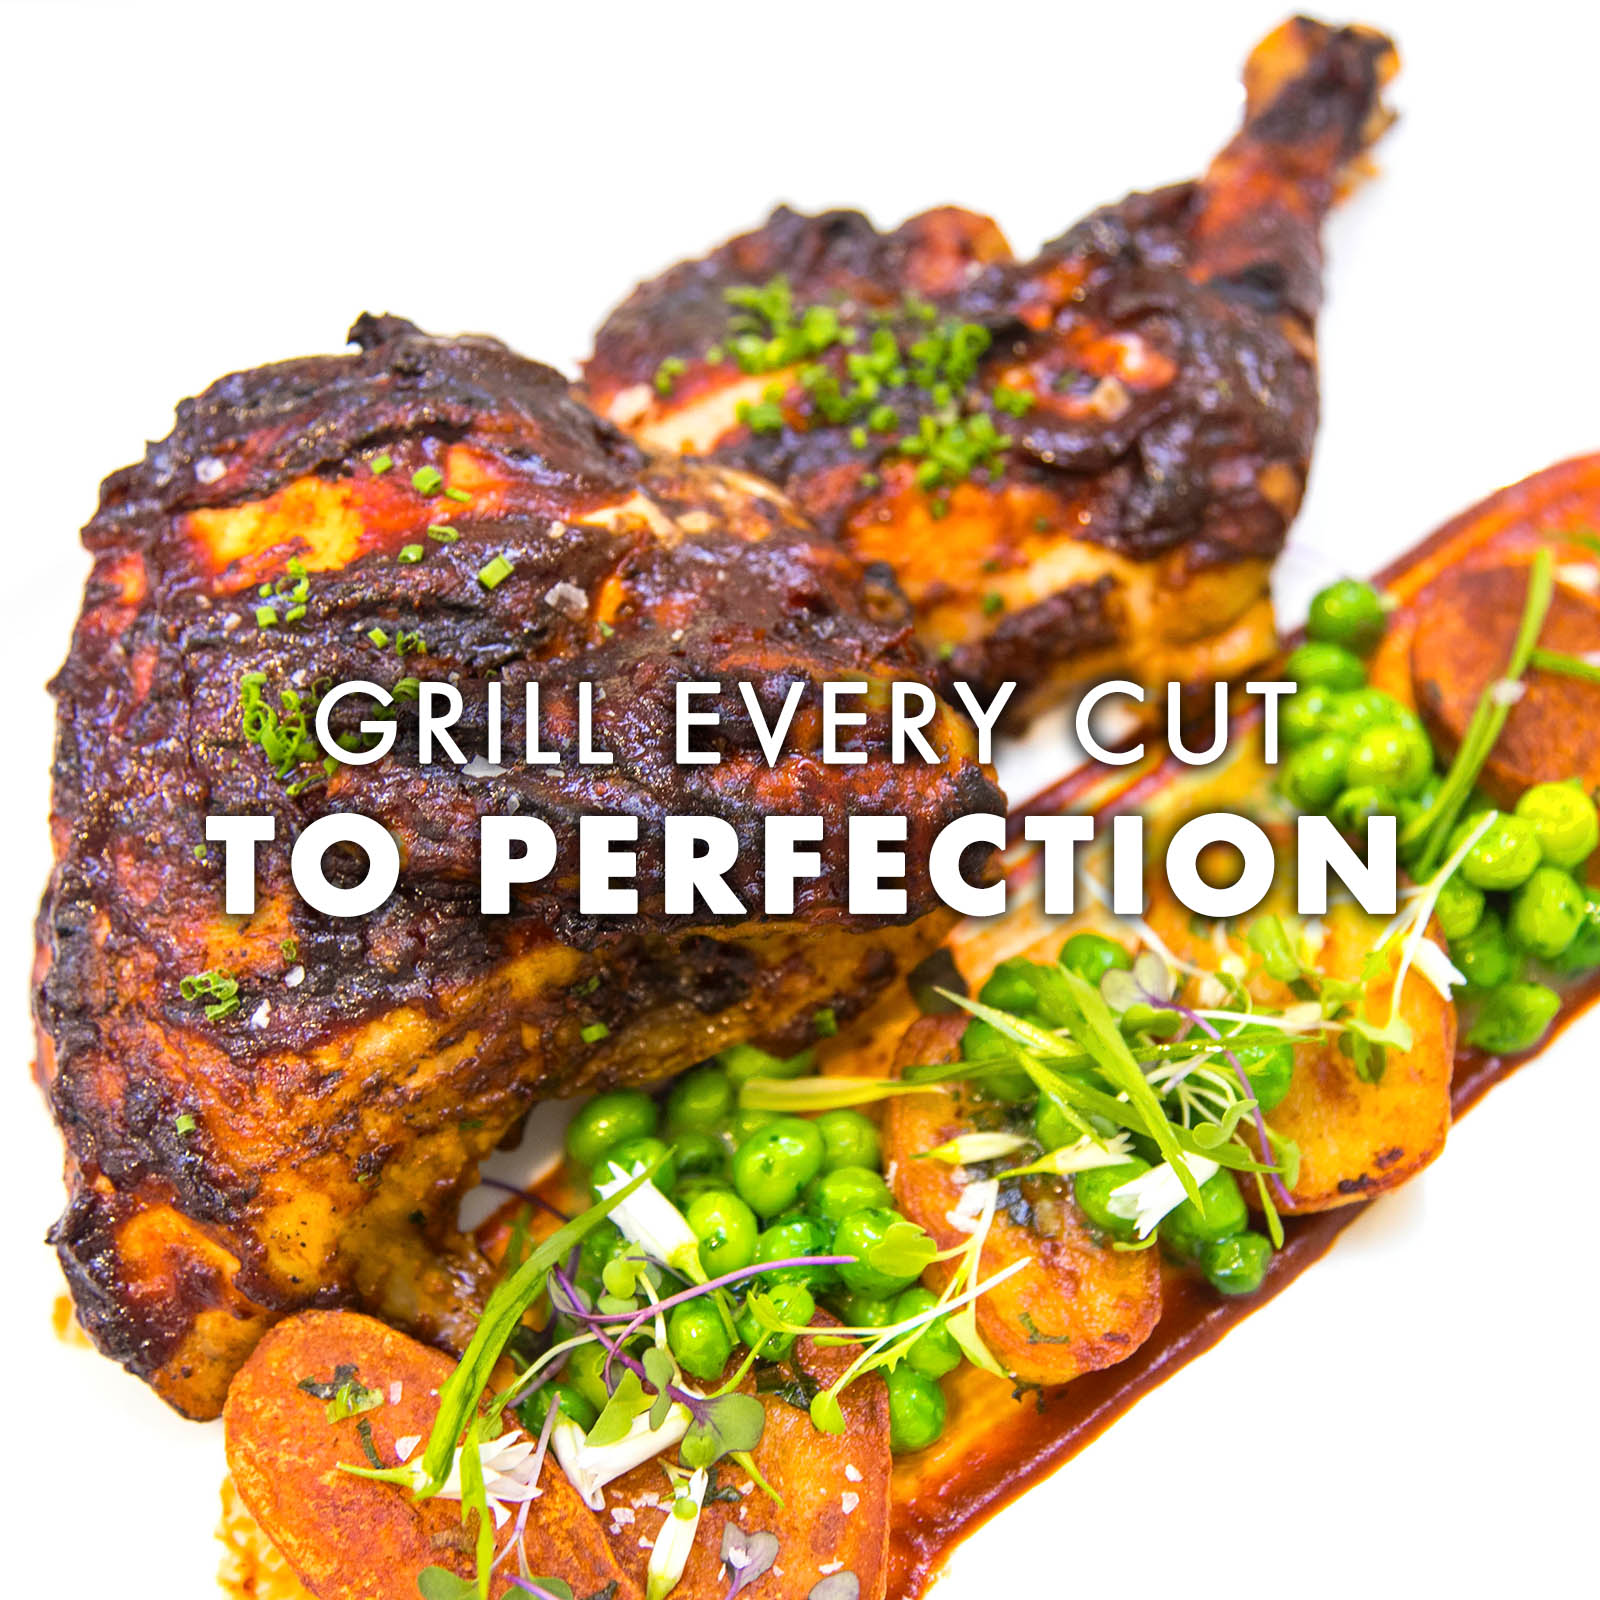 Grill Every Cut to Perfection-Thumbnail-2.jpg